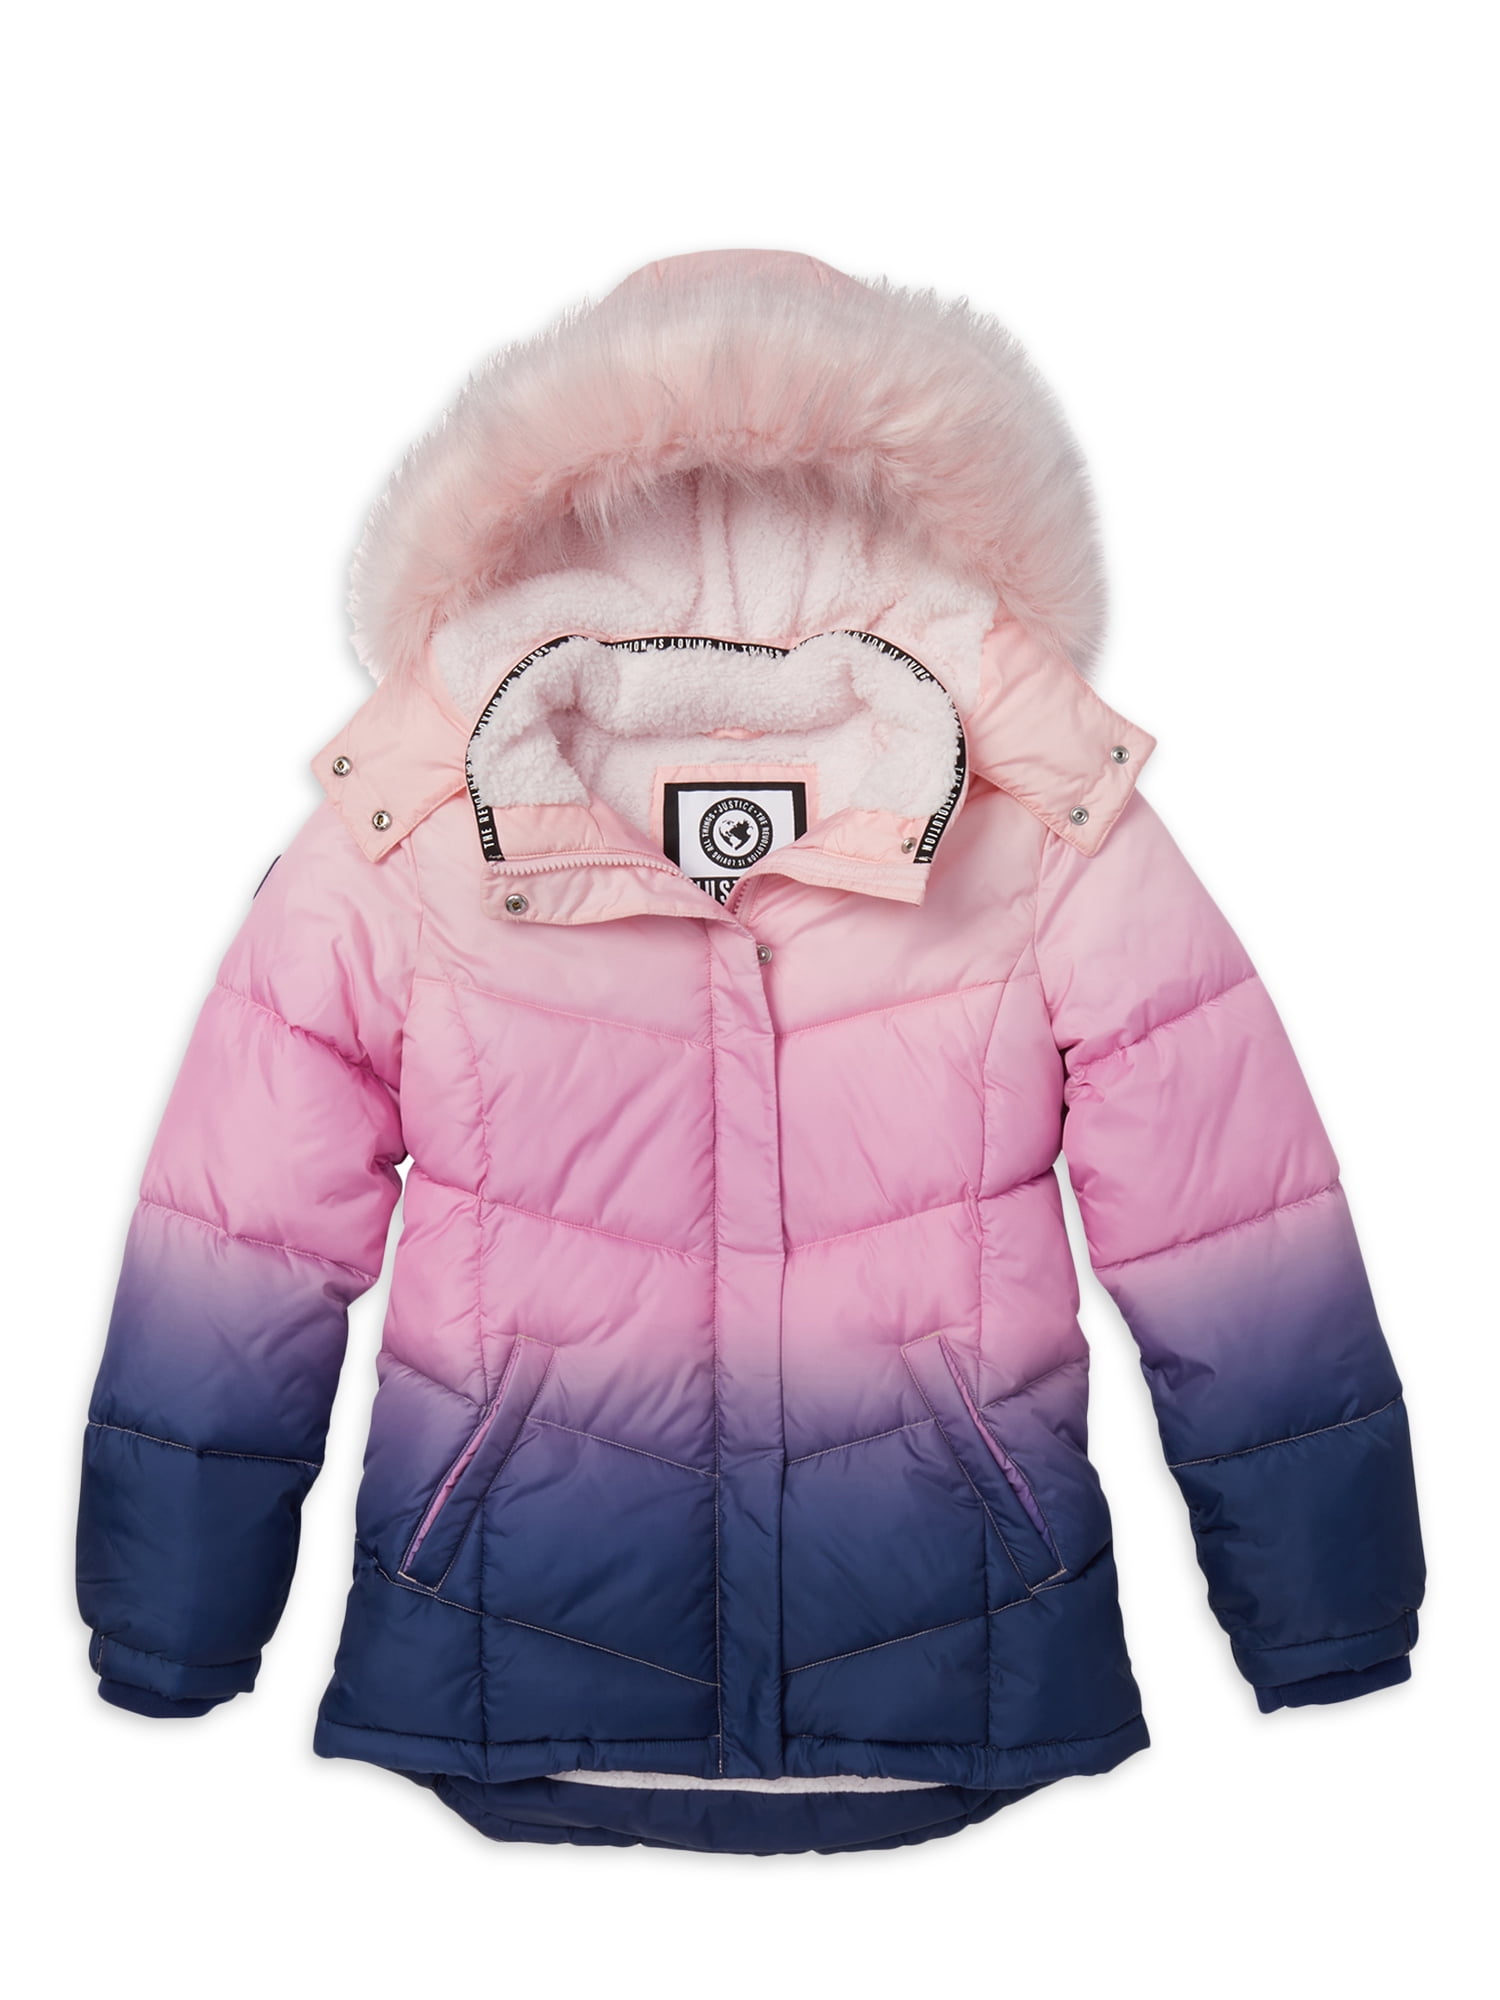 Character Wear Princesss Padded Coat Girls Pink Jacket Outerwear